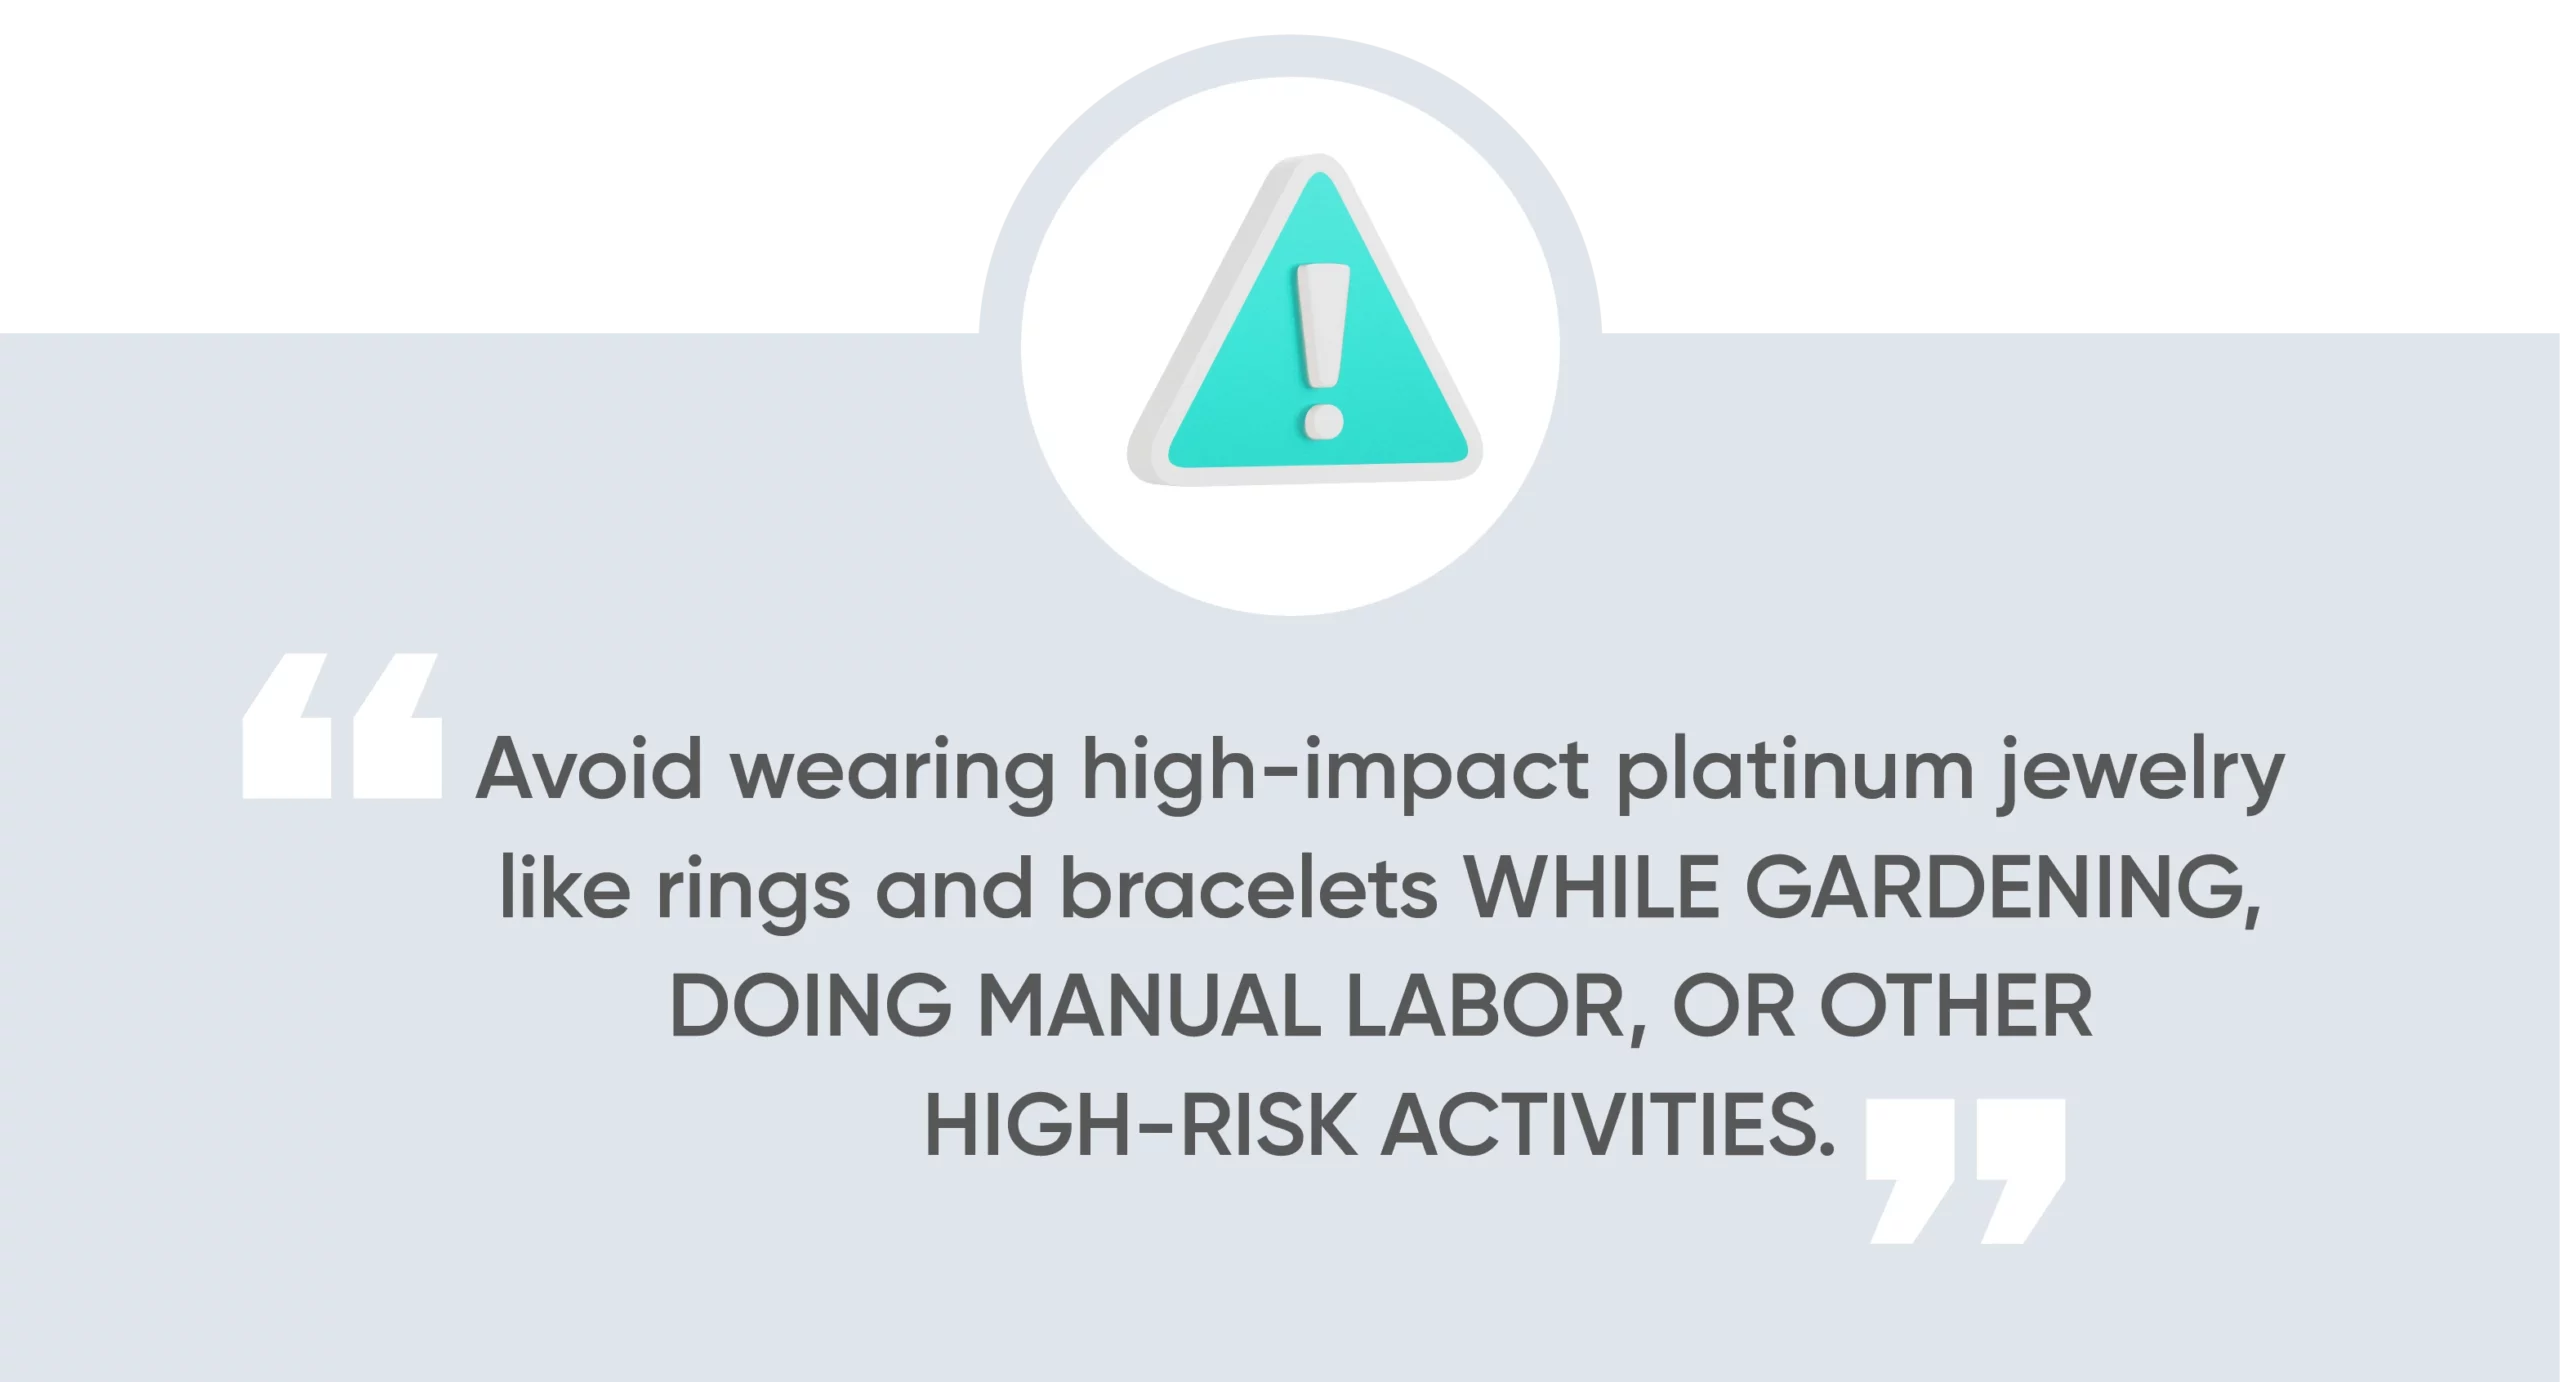 Avoid wearing high-impact platinum jewelry like rings and bracelets while gardening, doing manual labor, or other high-risk activities. 